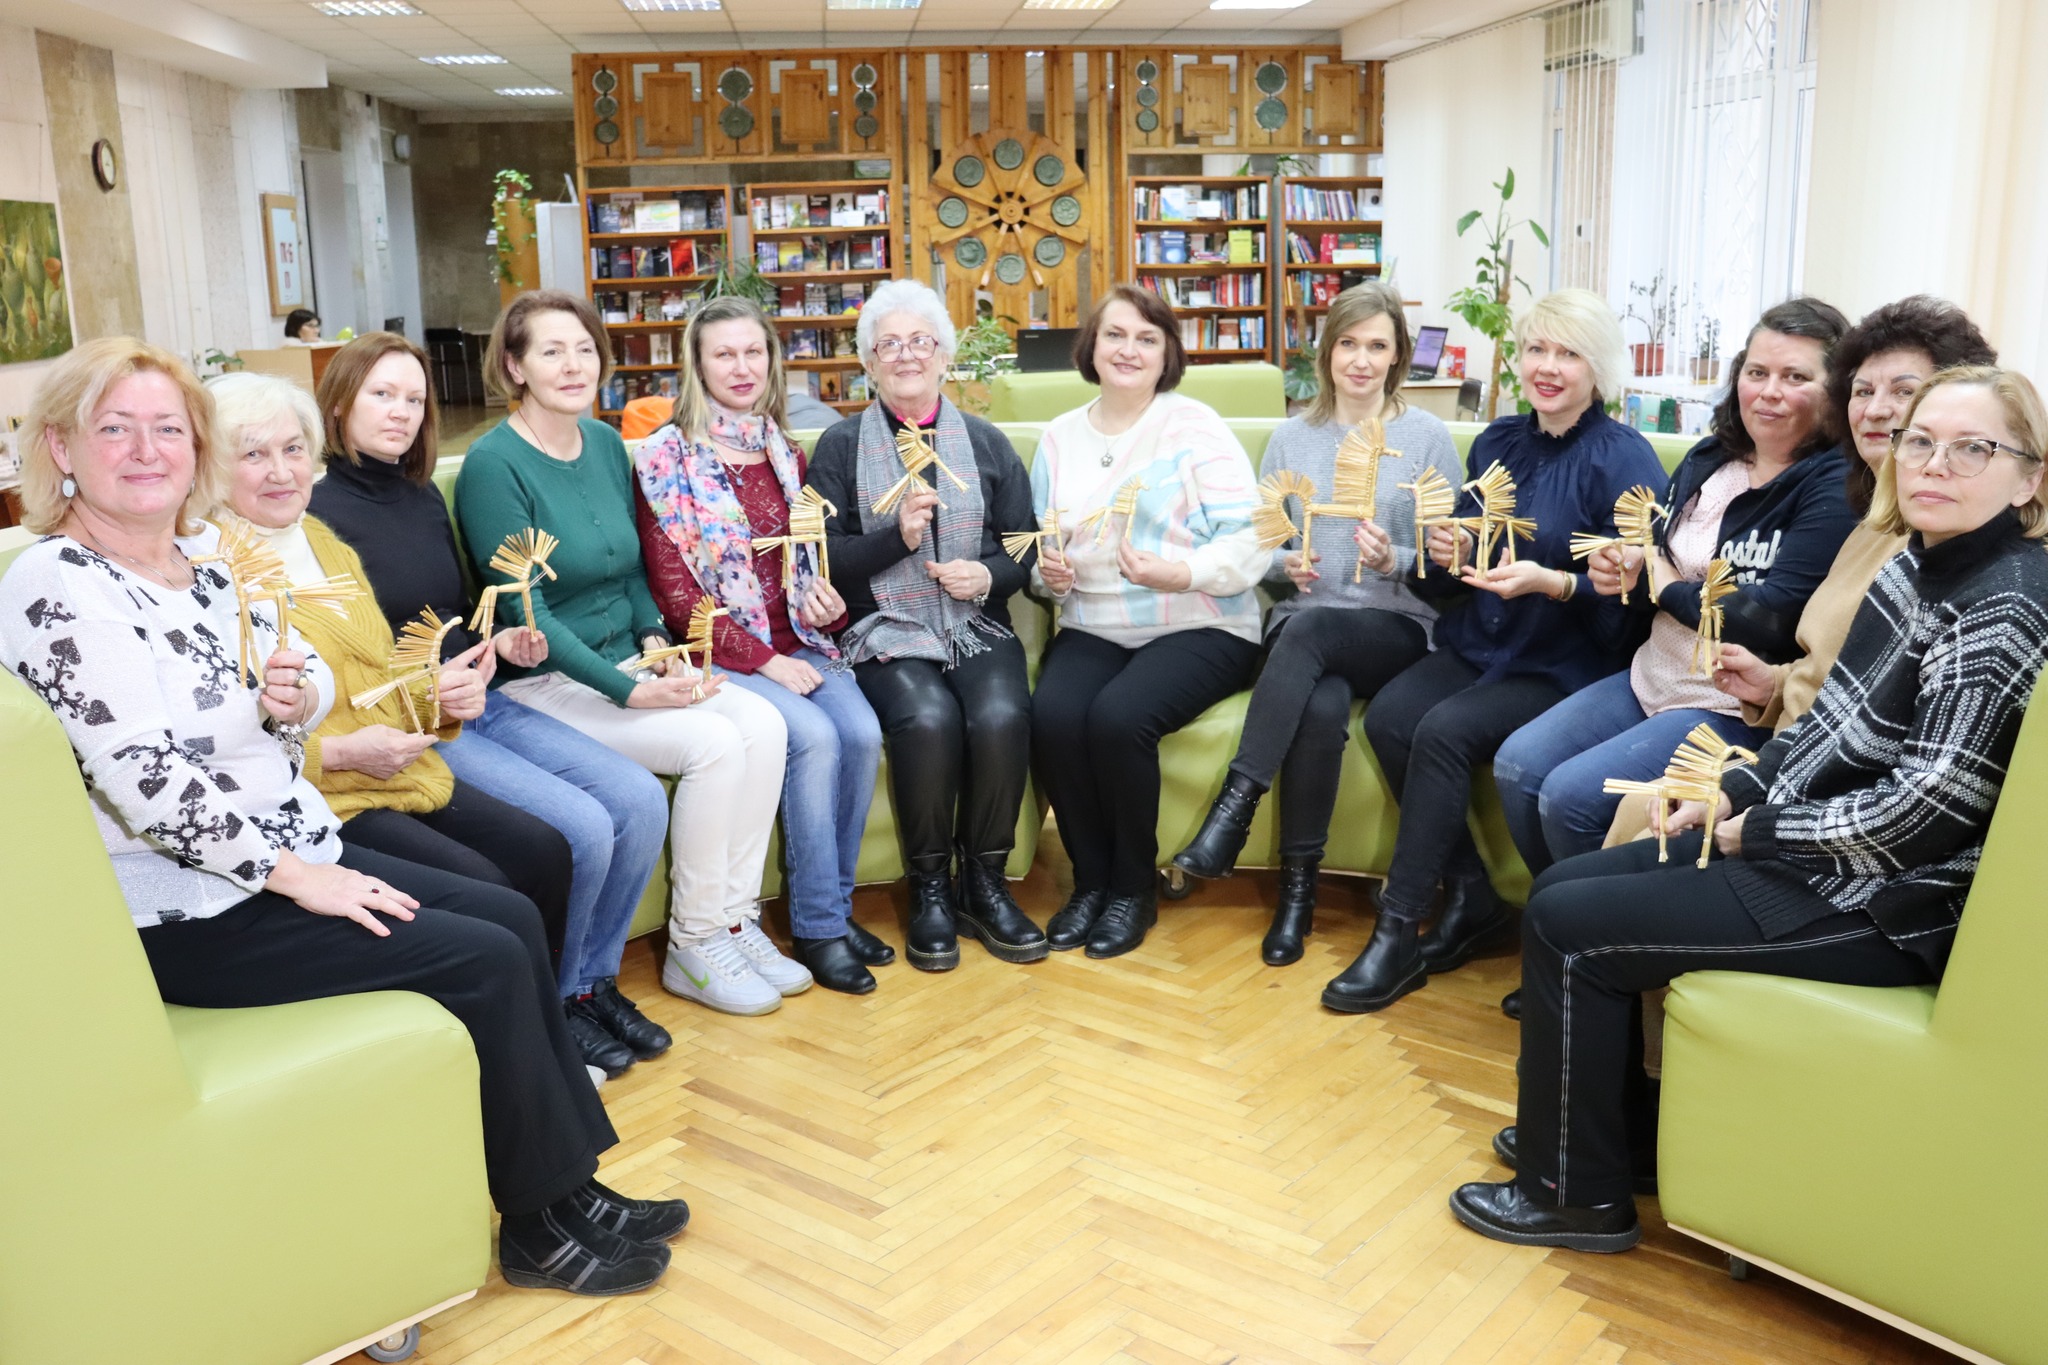 Regular visitors of the Central city library named after M.L. Kropyvnytskyi made a straw solar horse during the master class